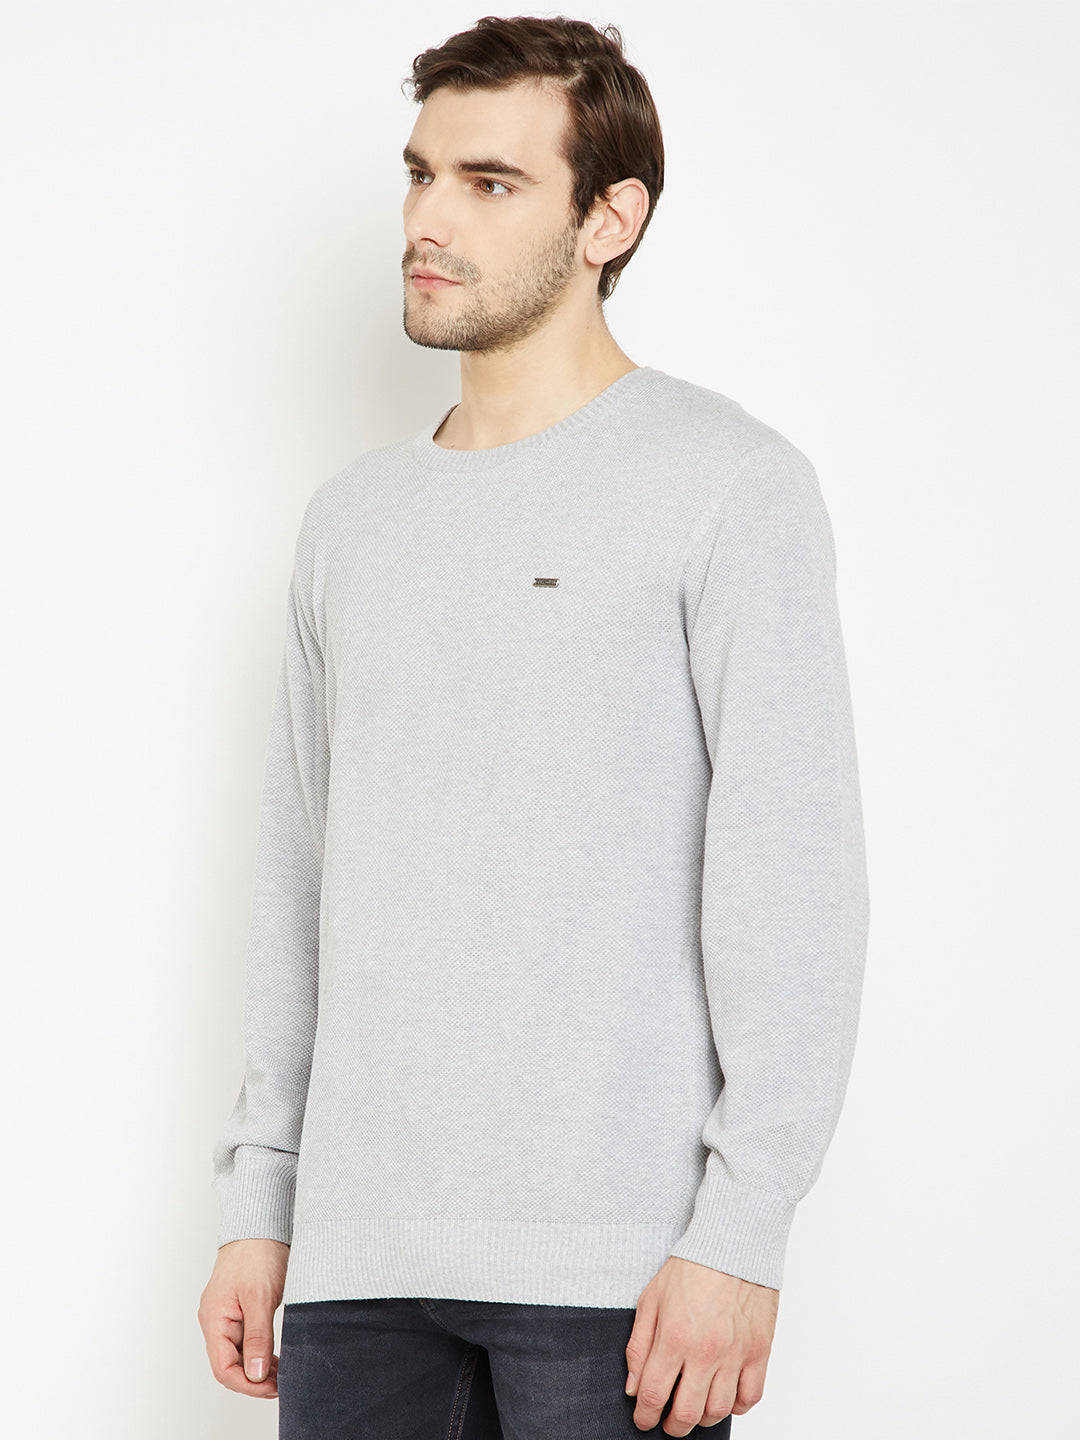 Grey Solid Round Neck Sweater-Mens Sweaters-Crimsoune Club